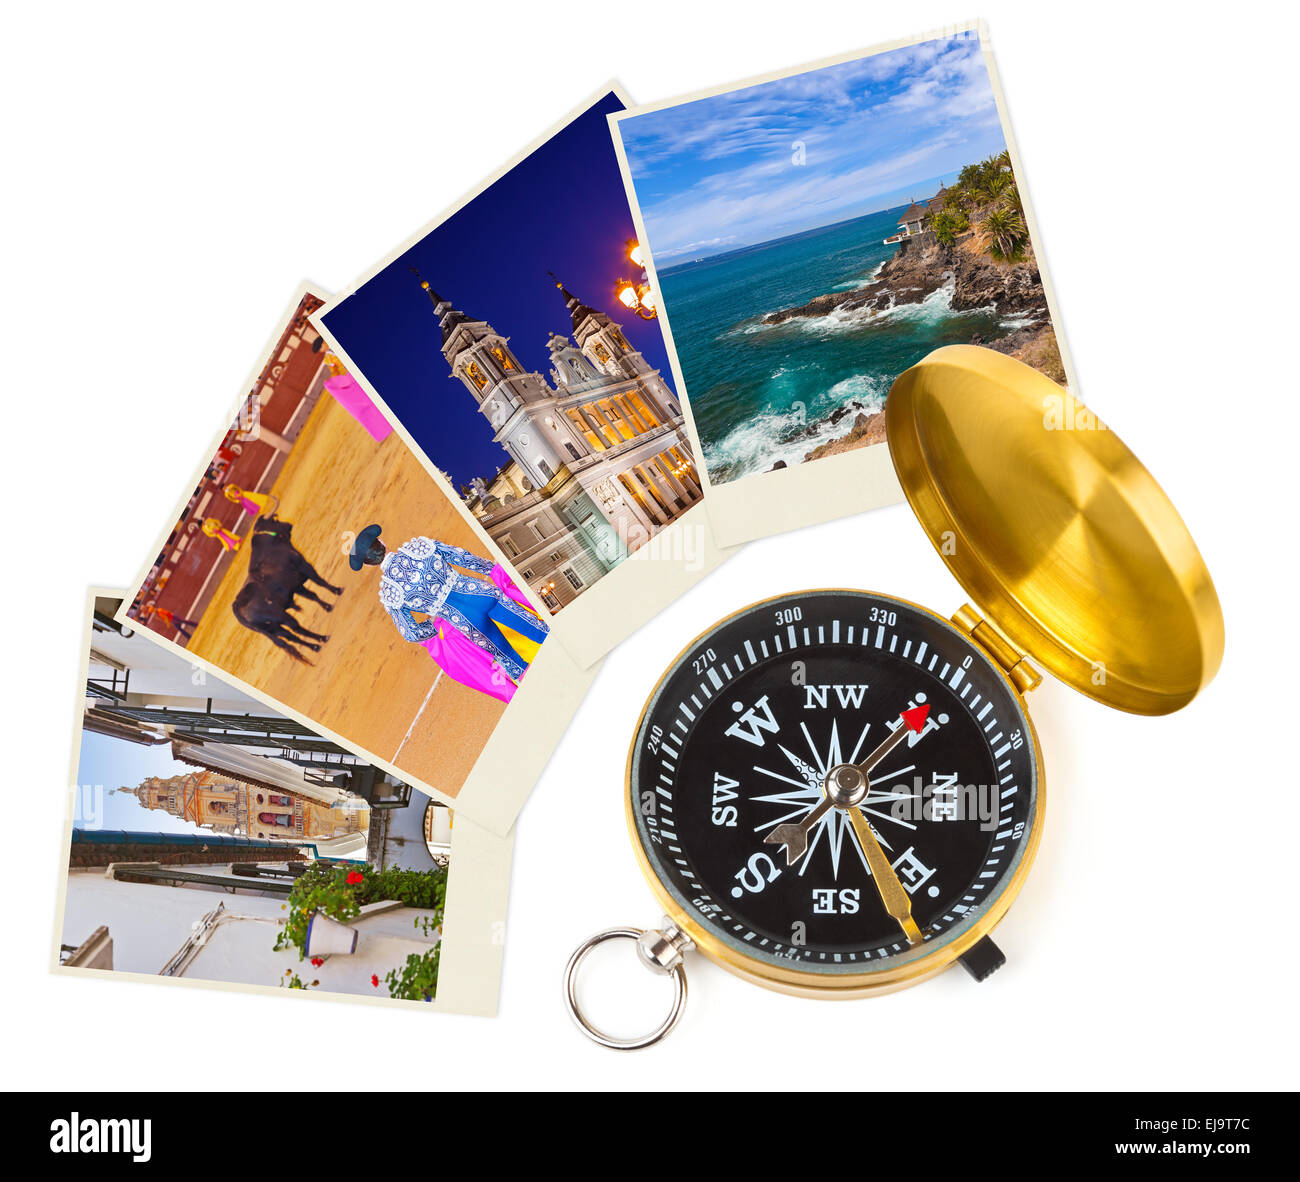 Spain travel images and compass (my photos) Stock Photo